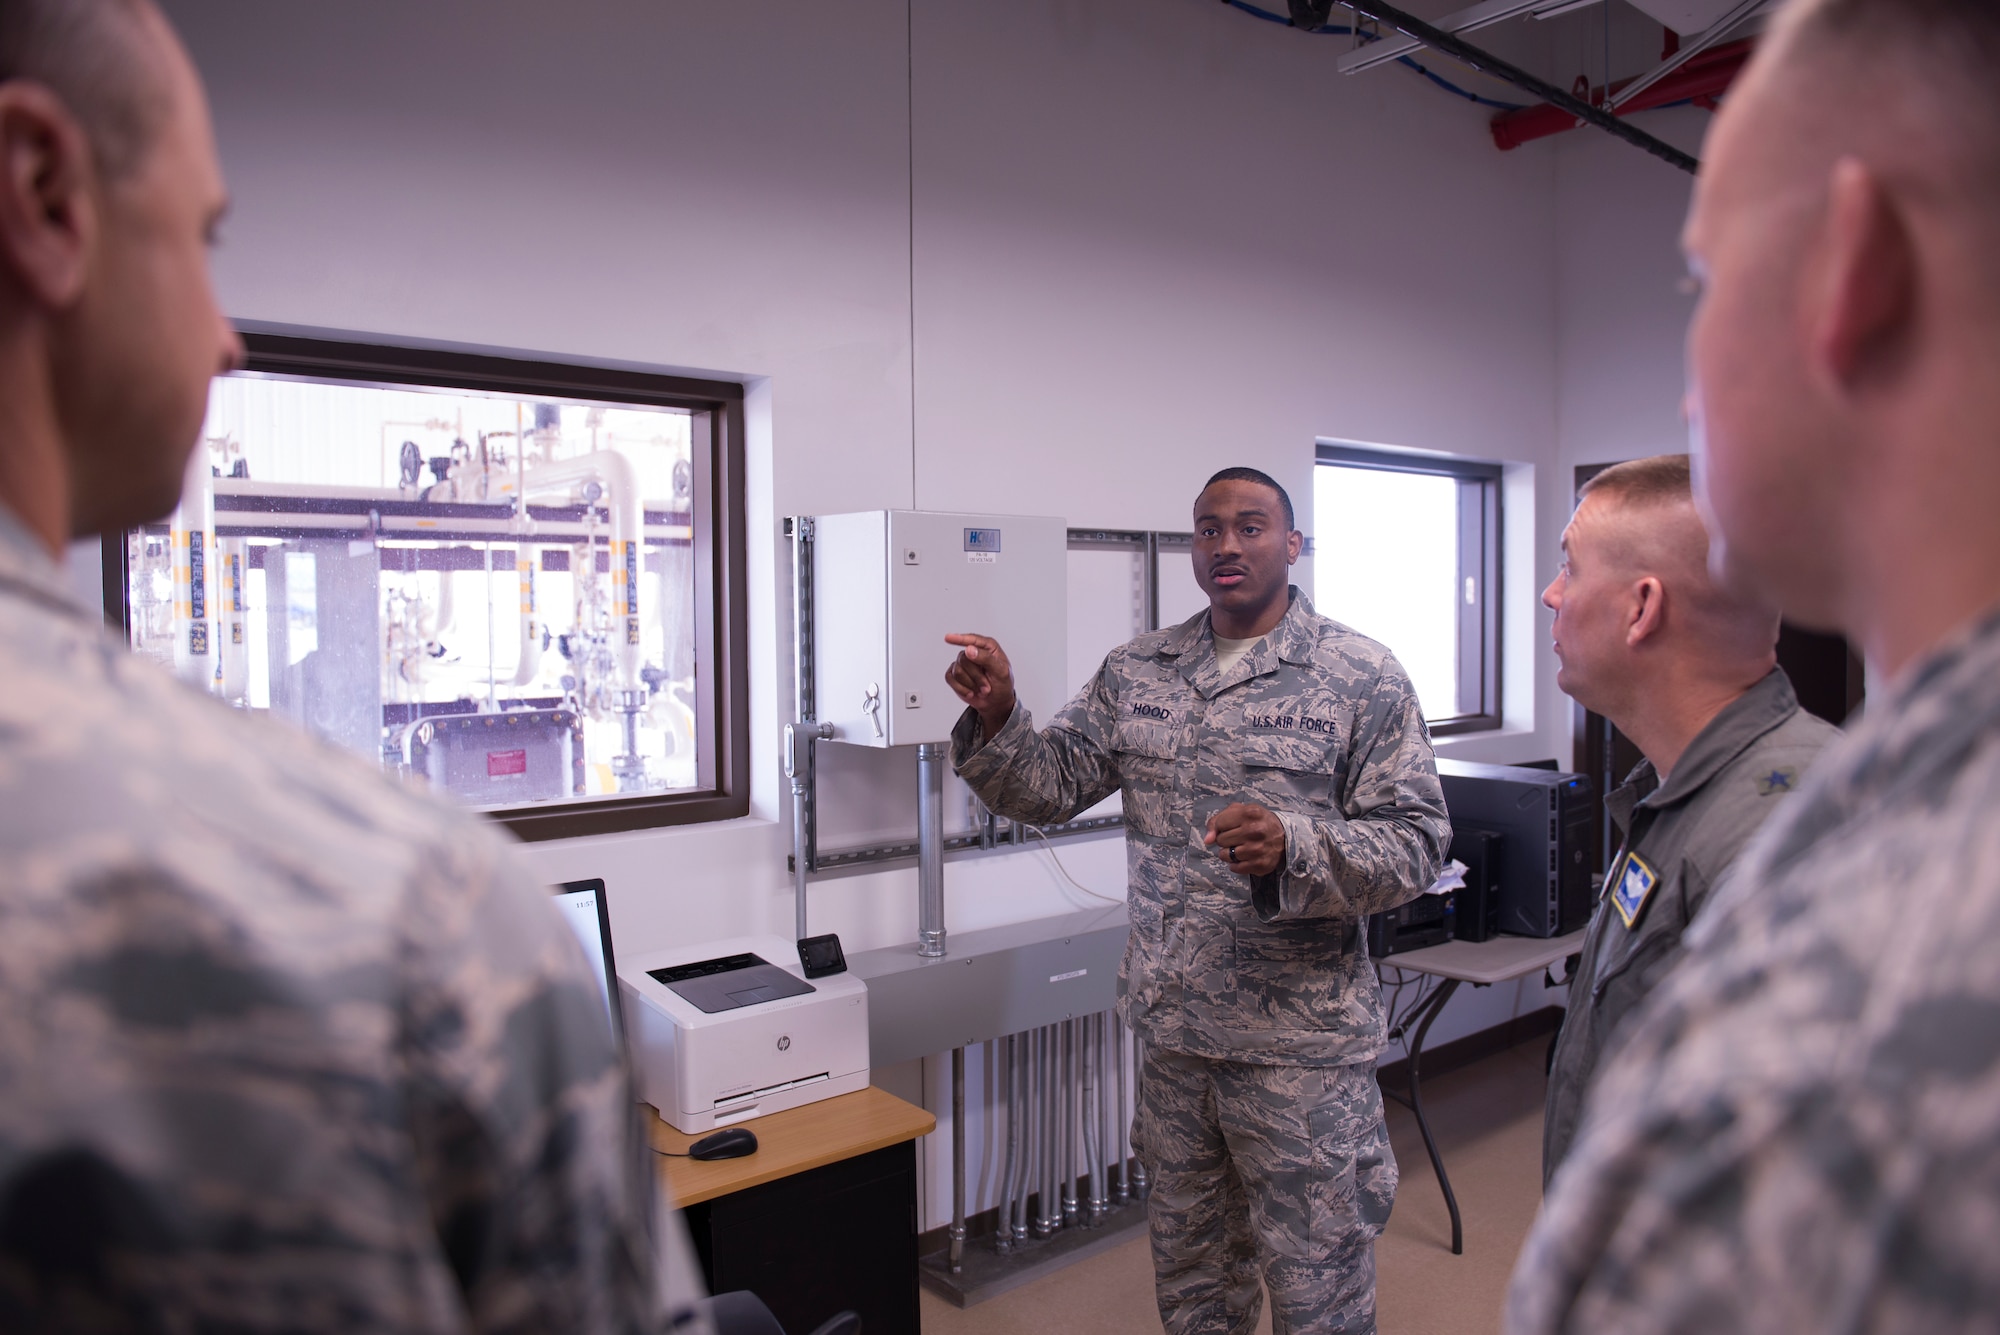 Senior Airman Kyle Hood, 56th Logistics Readiness Squadron Fuels Knowledge Operations administrator, explains system processes and control functions of the new fuel pump house to members of Luke’s command team at Luke Air Force Base, Ariz. March 15, 2018. The pump house will pump fuel from offsite sources into on-base tanks and then distribute fuel to various locations, including a new fill stand on the flight line. (U.S. Air Force photo by Senior Airman Ridge Shan)